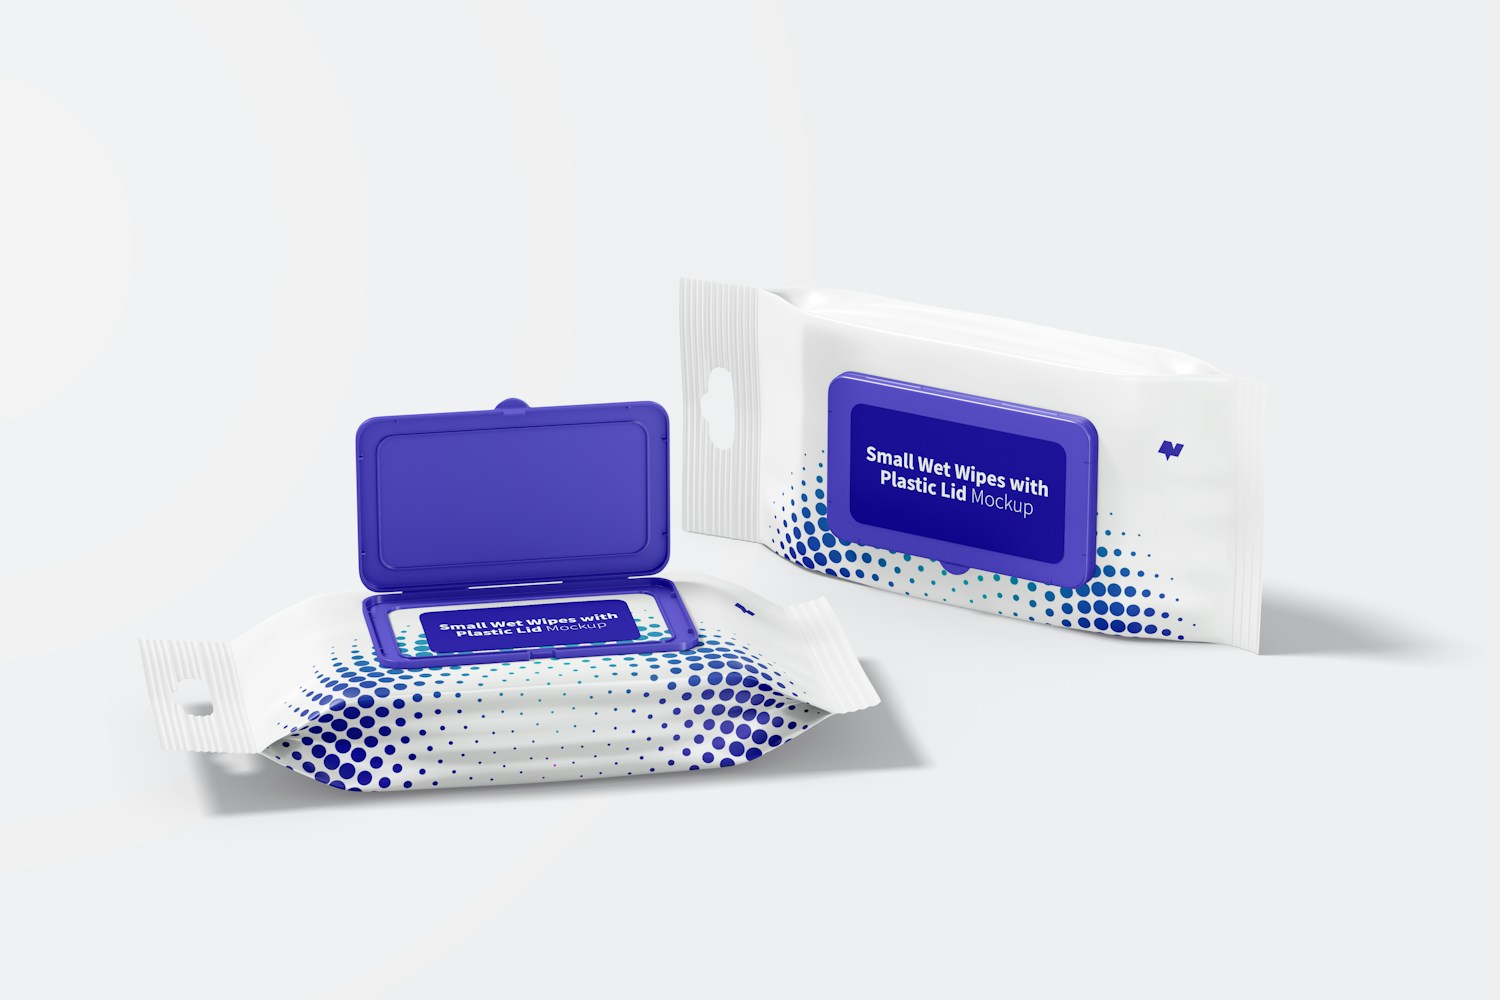 Small Wet Wipes with Plastic Lid Packaging Mockup, Opened and Closed